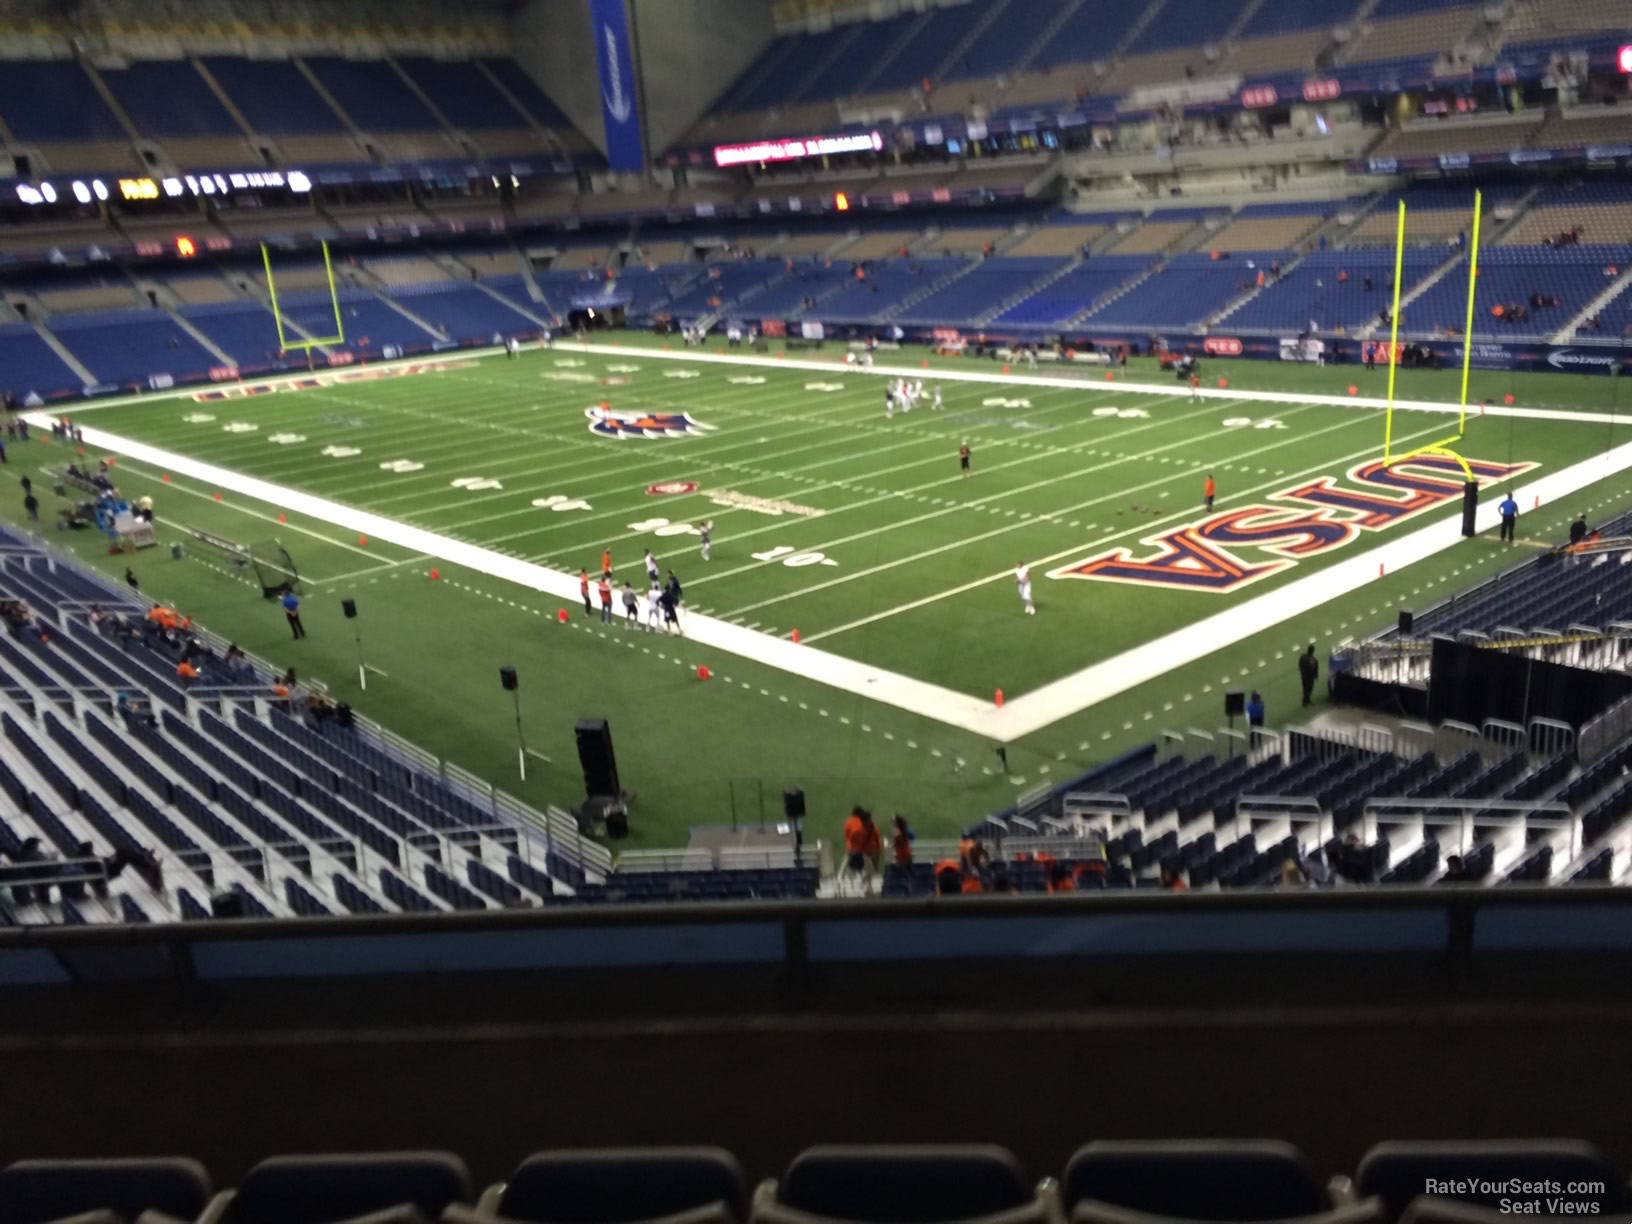 section 227c, row 5 seat view  for football - alamodome